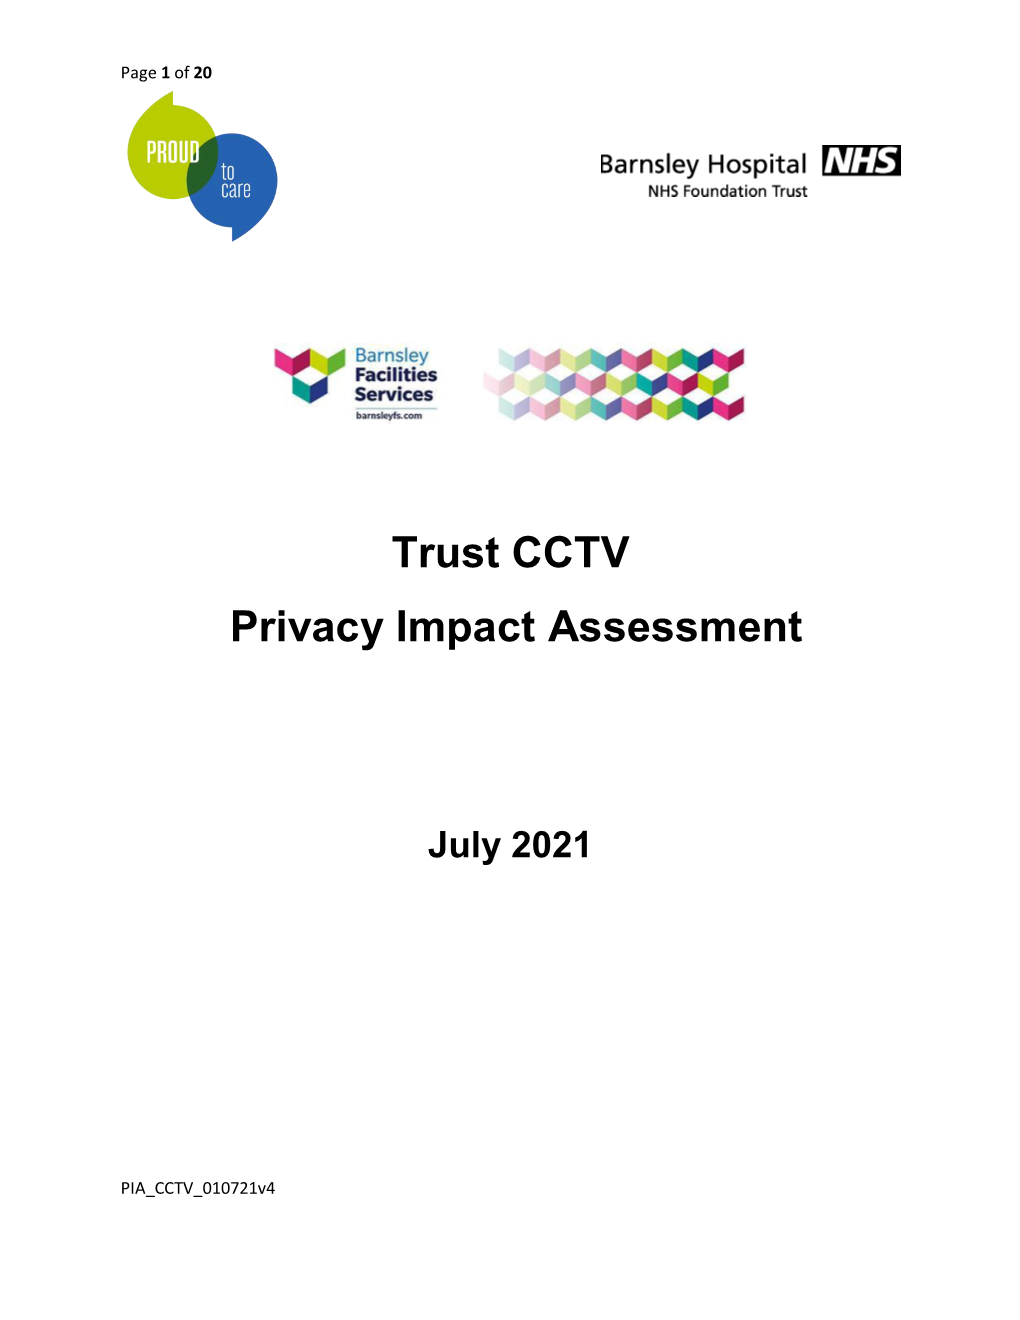 Privacy Impact Assessment for CCTV